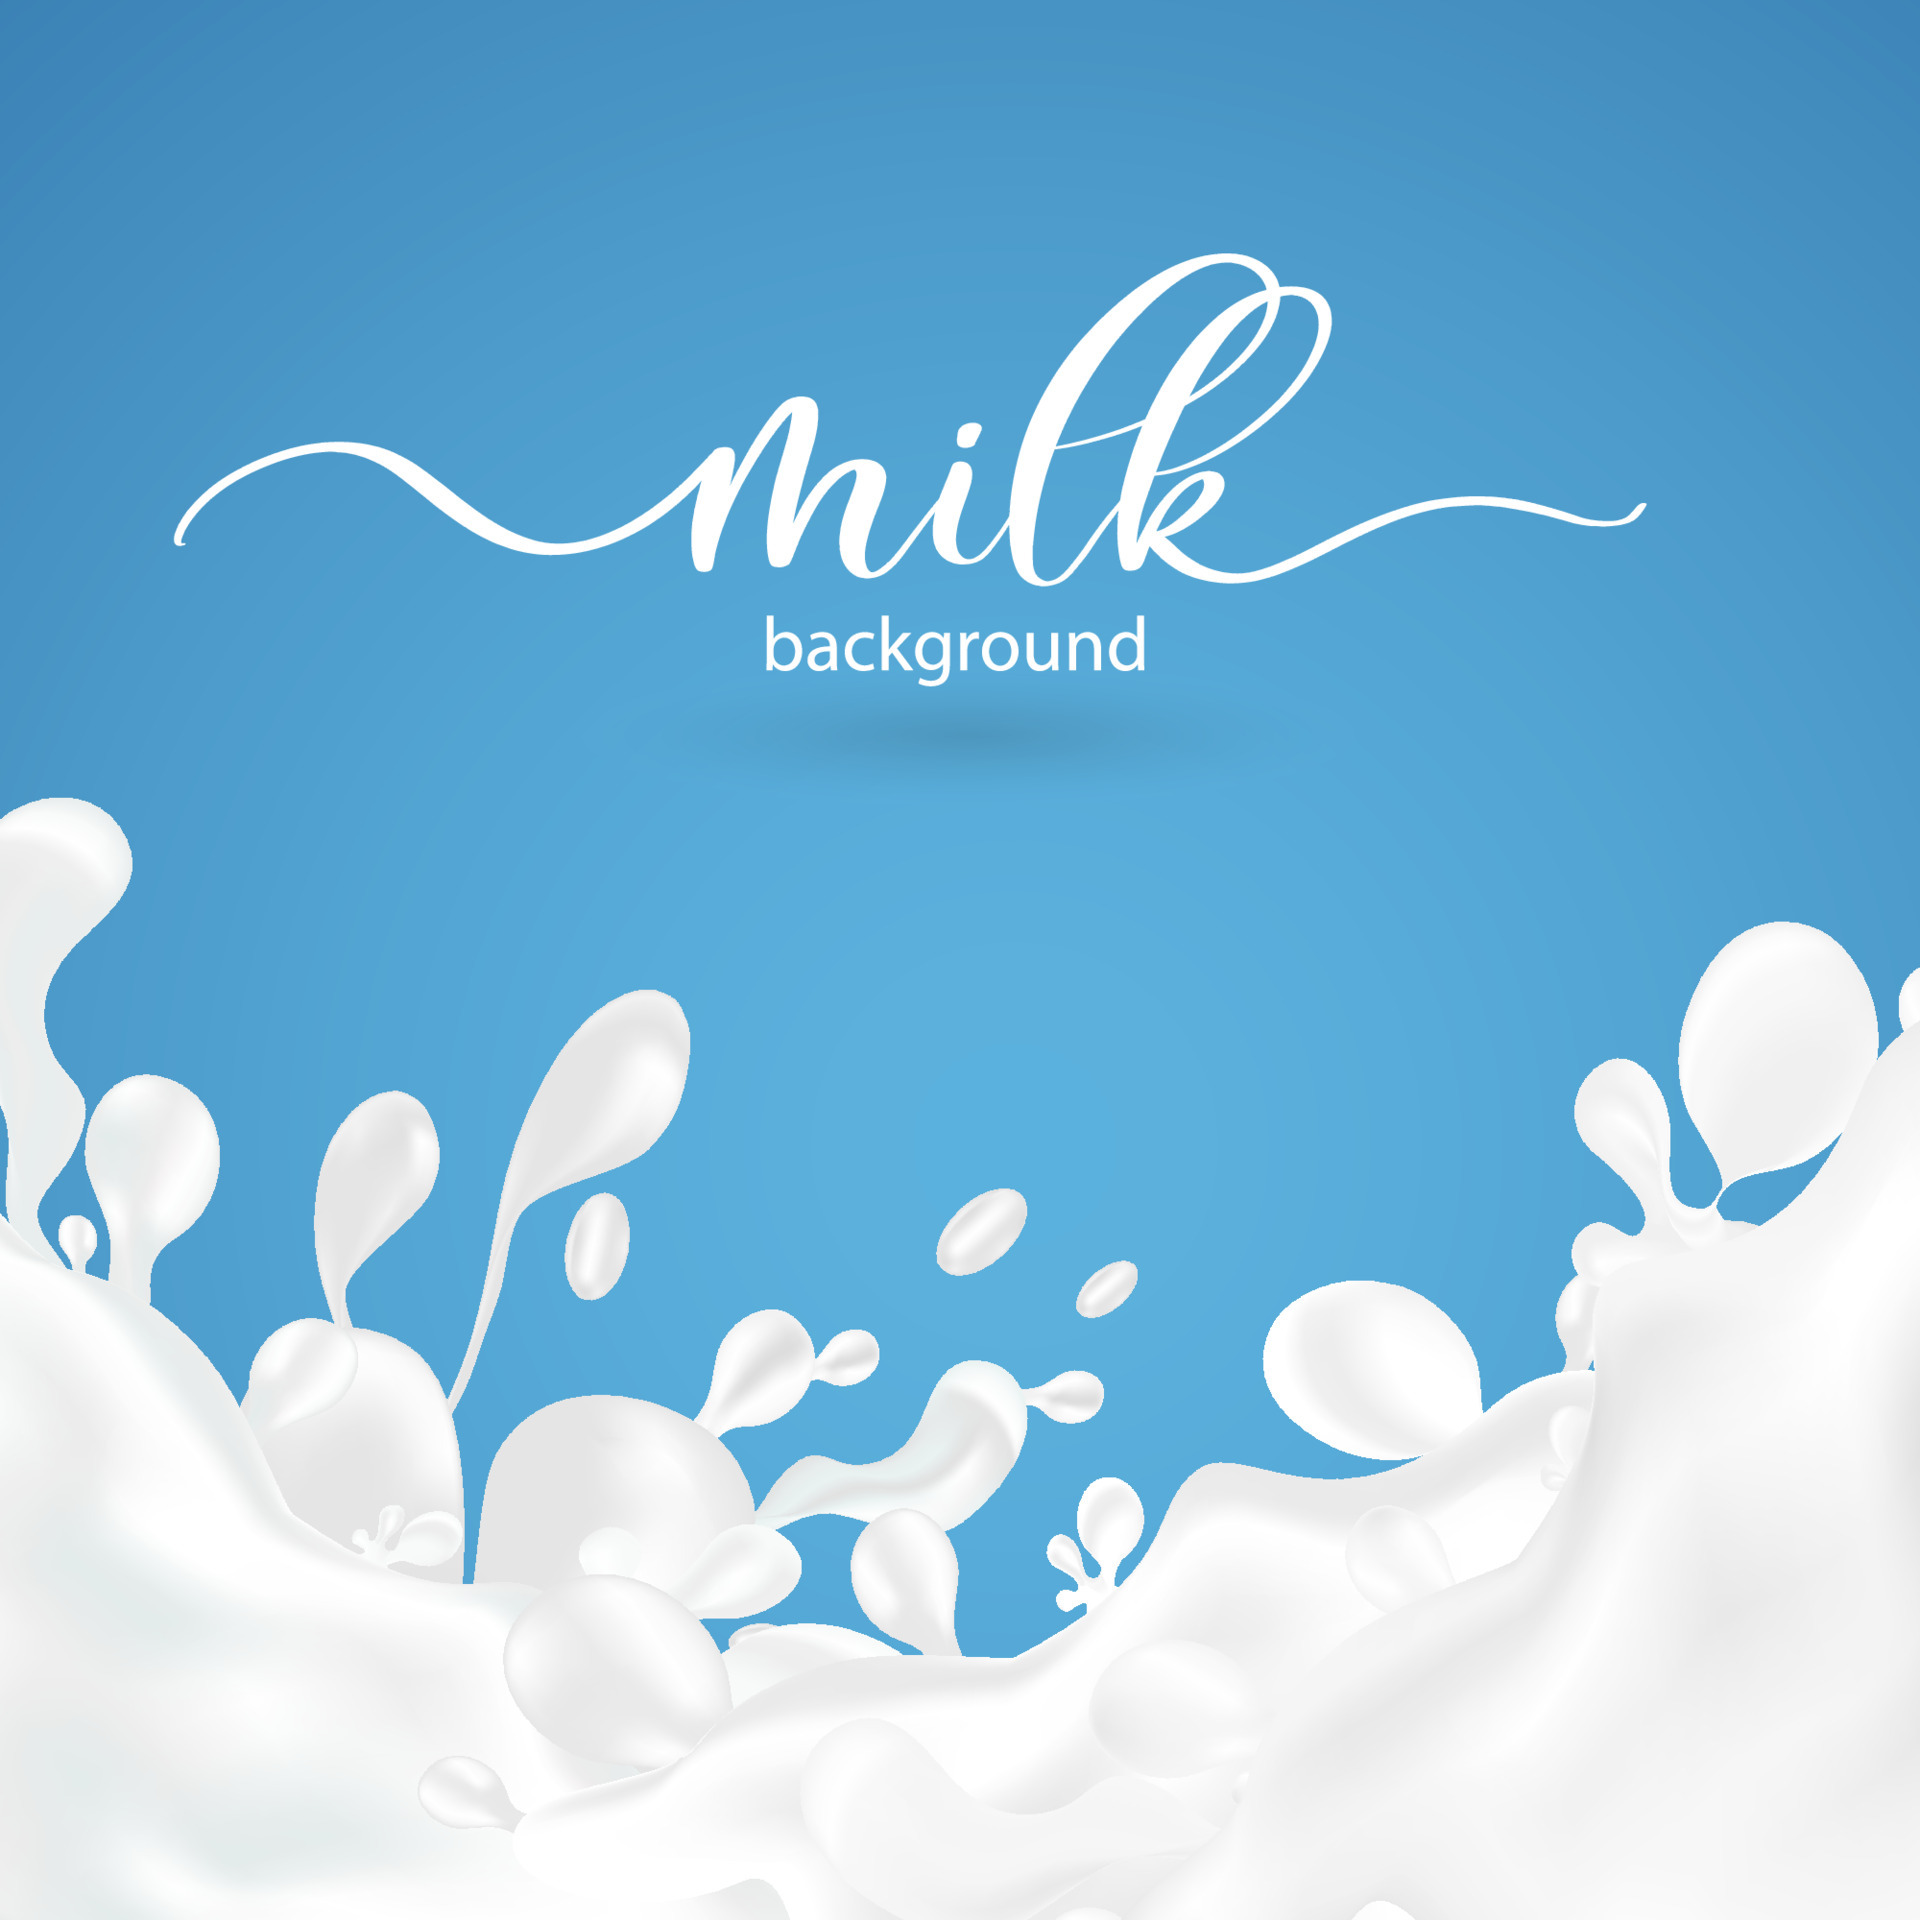 Milk splash background. Realistic milky splashes and drops background of dairy drink or yoghurt on blue background